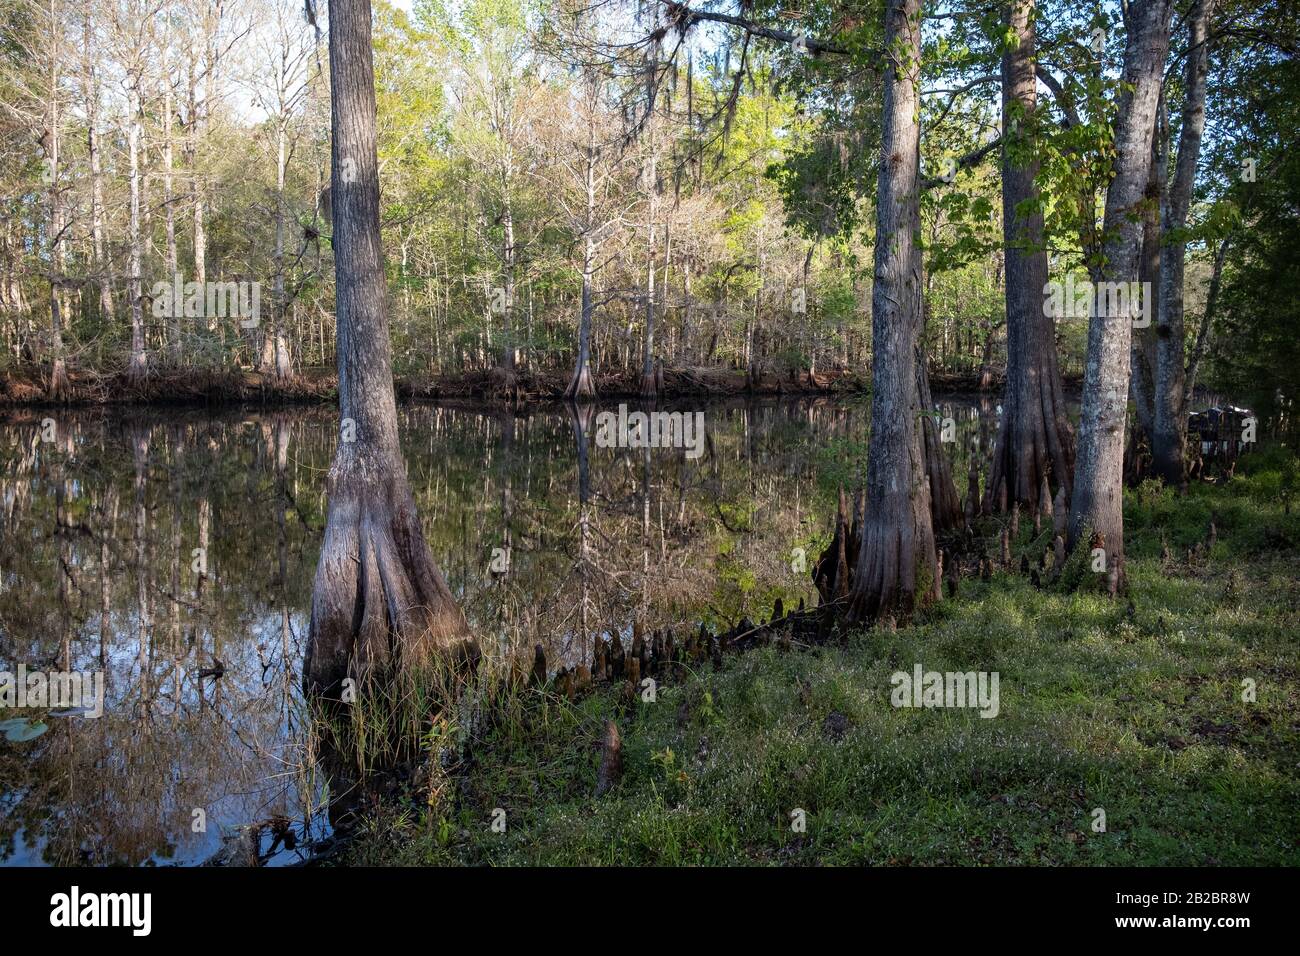 Withlahoochee River, Donnellon, Florida. Stockfoto